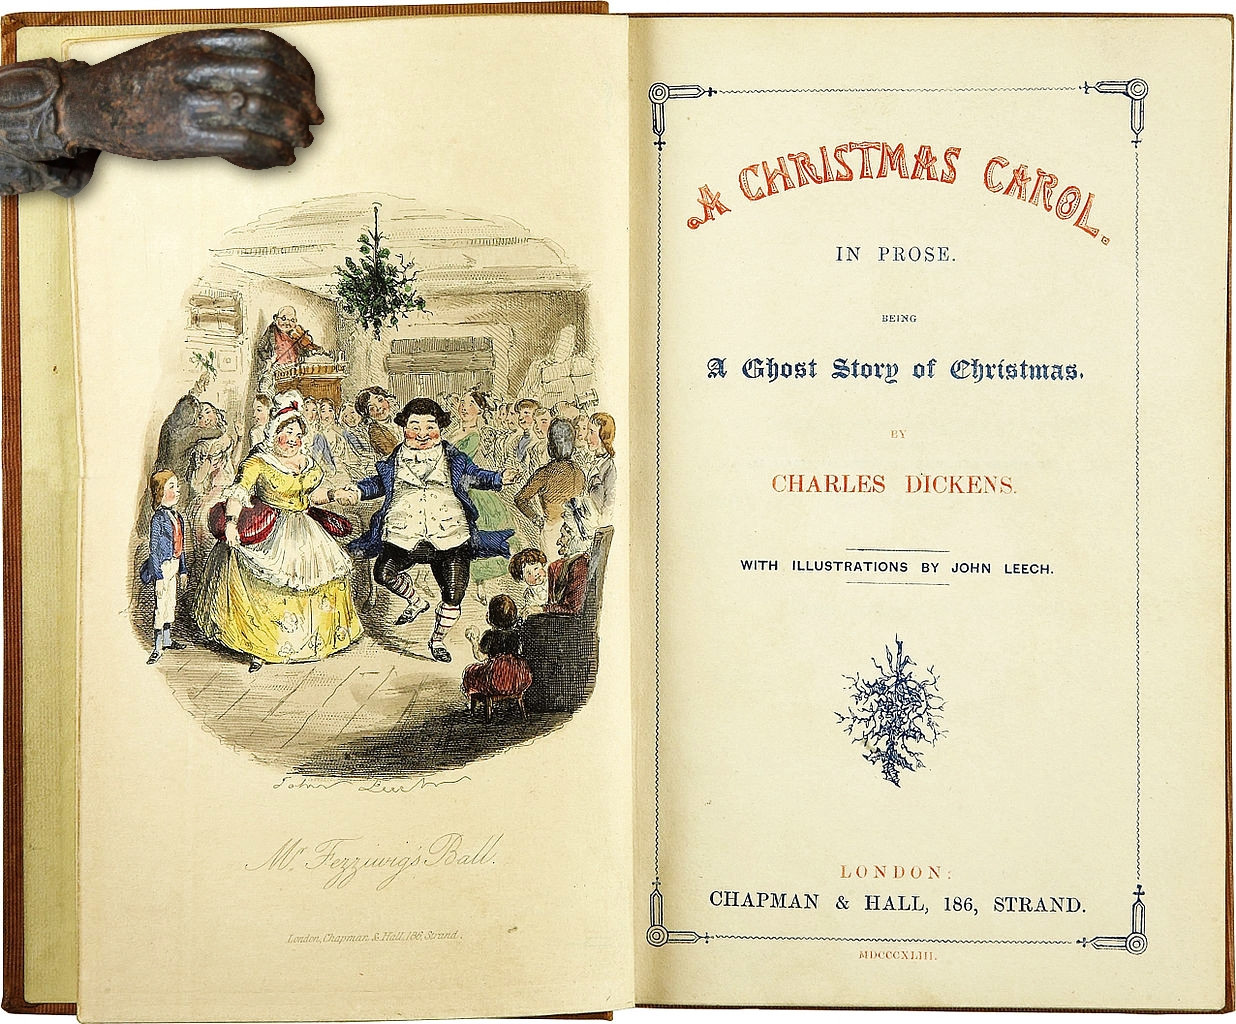 A Christmas Carol by Charles Dickens. In Prose. Being a Ghost Story of Christmas. With Illustrations by John Leech. Chapman & Hall, London, 1843. First edition. Title page.